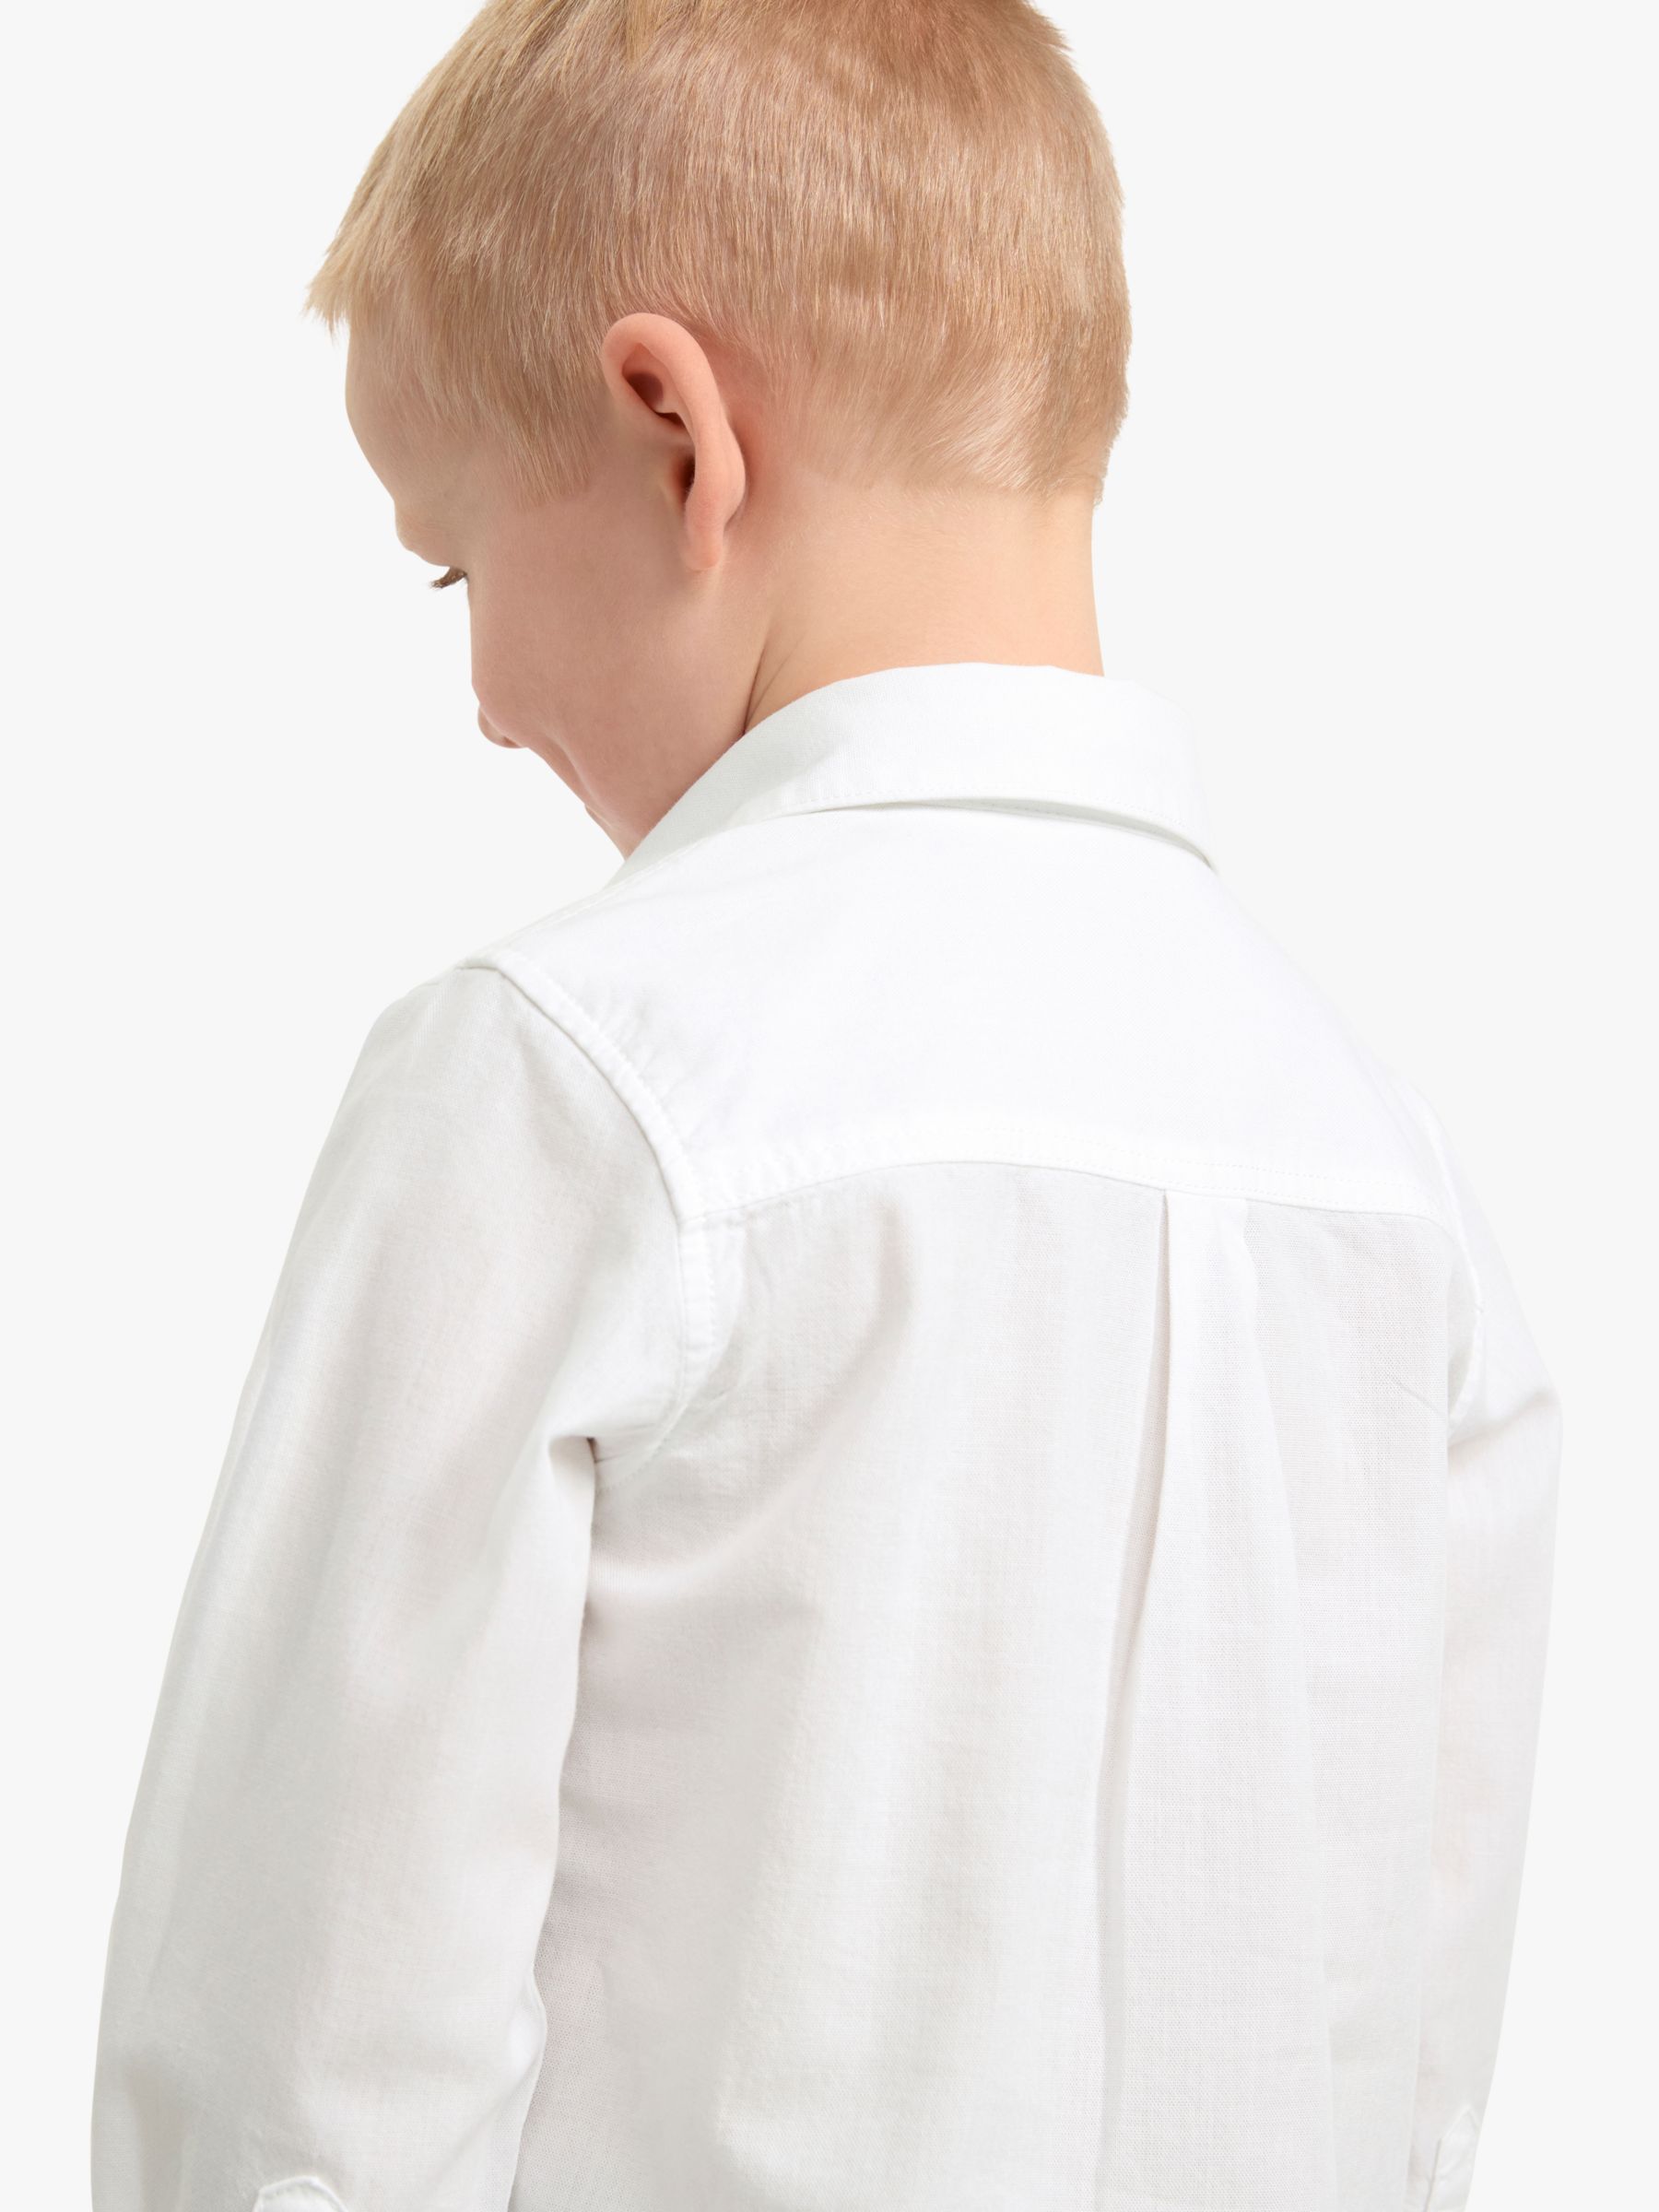 Lindex Kids' Preppy Oxford Long Sleeve Shirt, White, 2 years